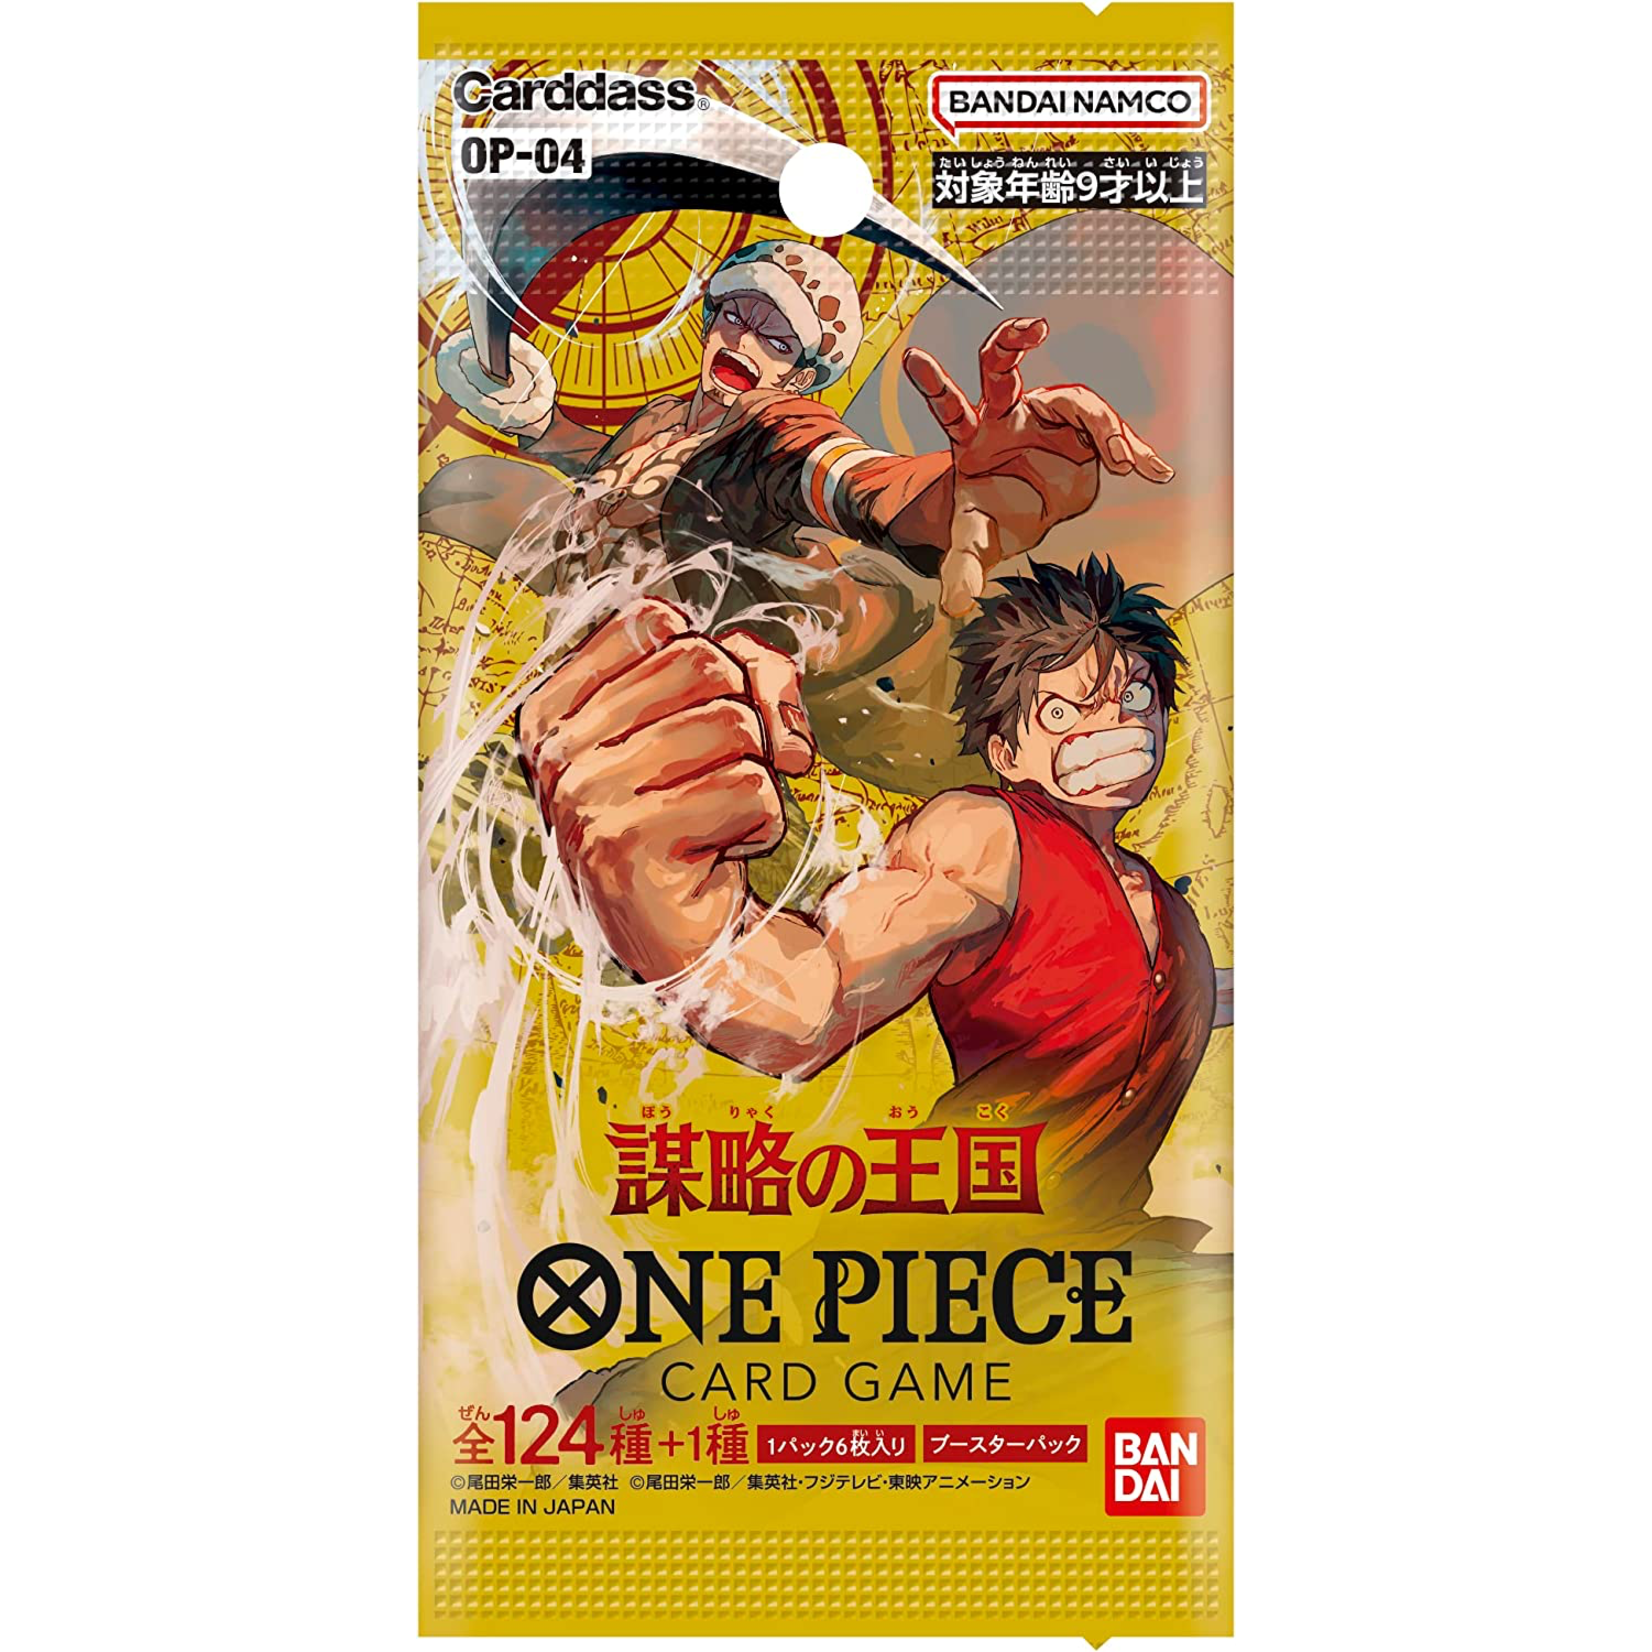 One Piece TCG: Kingdoms of Intrigue Booster Pack (9) (OP-04) Japanese